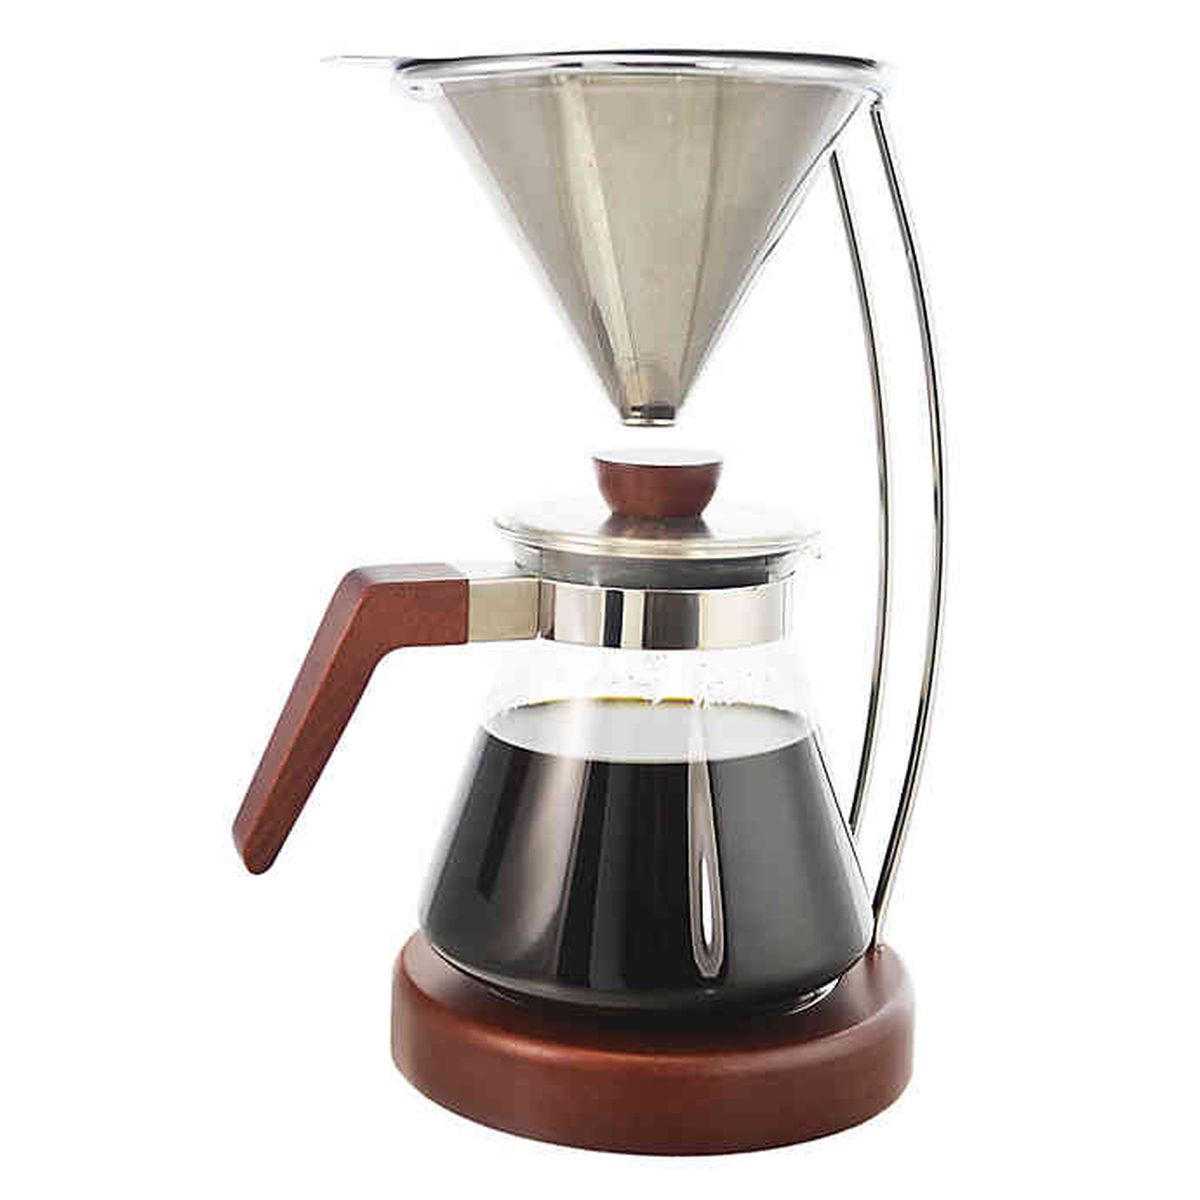 A glass coffee pot that sits on a wooden base. Comes with a stainless steel filter. 